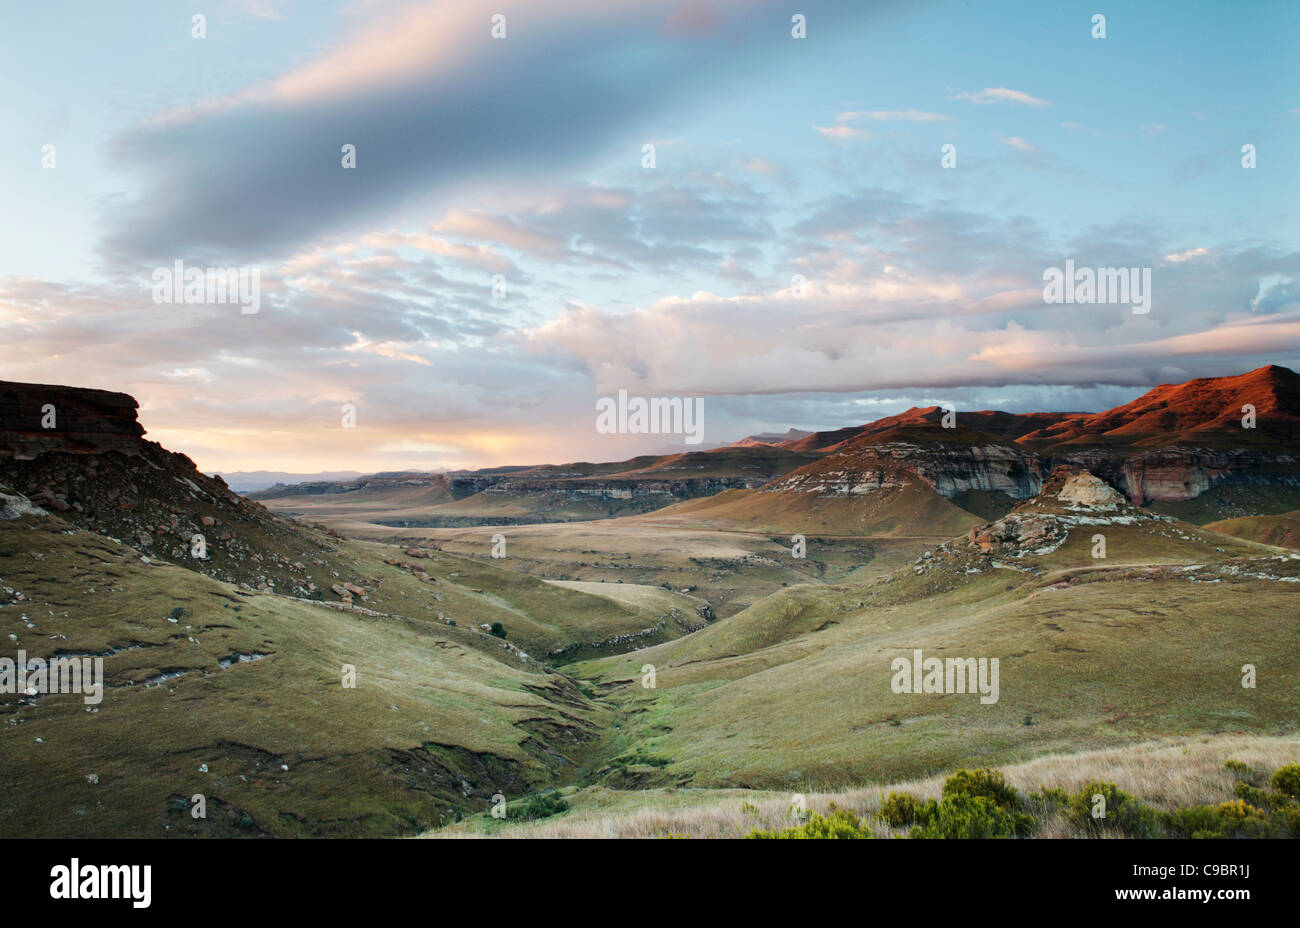 View of Maluti Mountains, Golden Gate Highlands National Park, Free State Province, South Africa Stock Photo